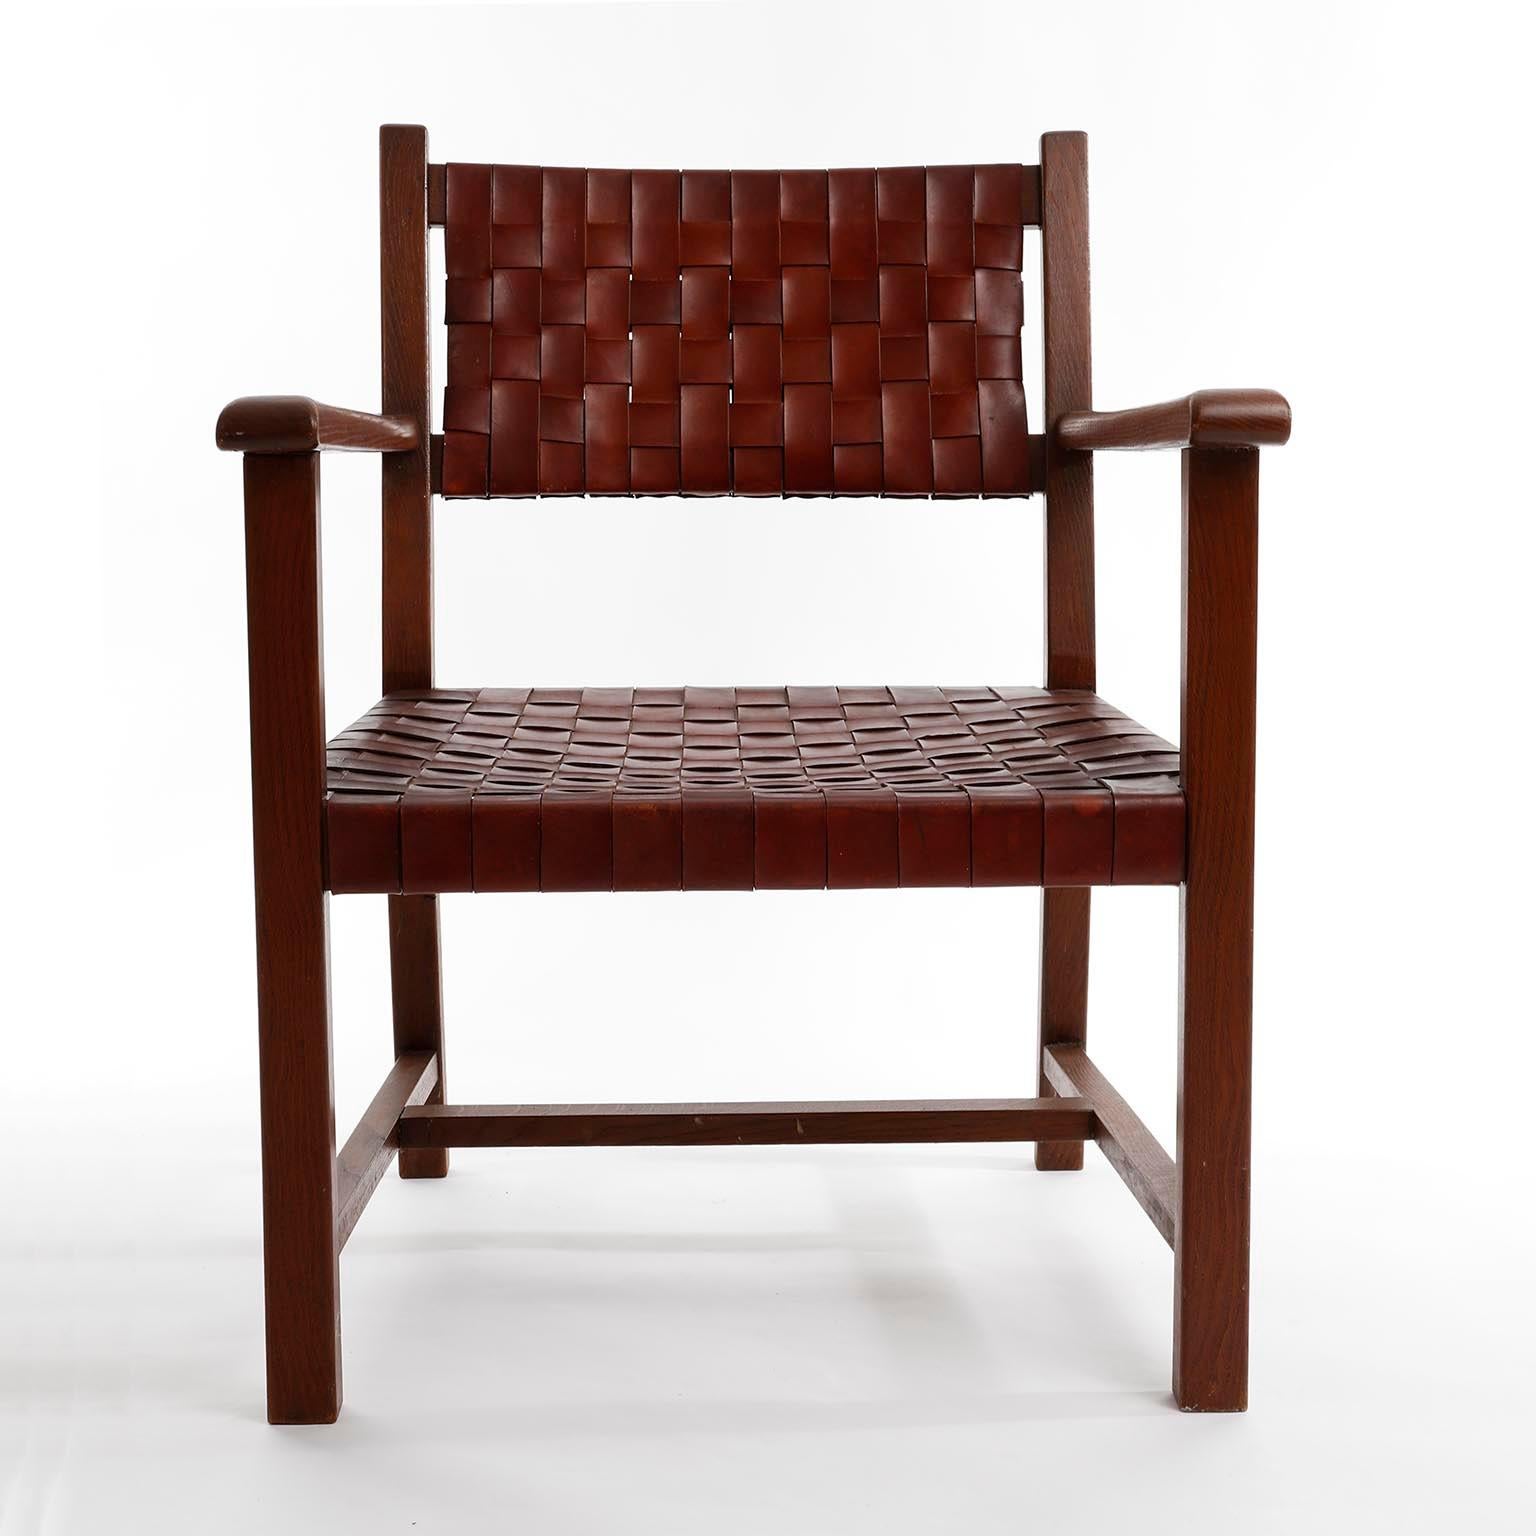 Mid-Century Modern Armchair in Cognac Brown Patinated Braided Leather and Oak, 1960s For Sale